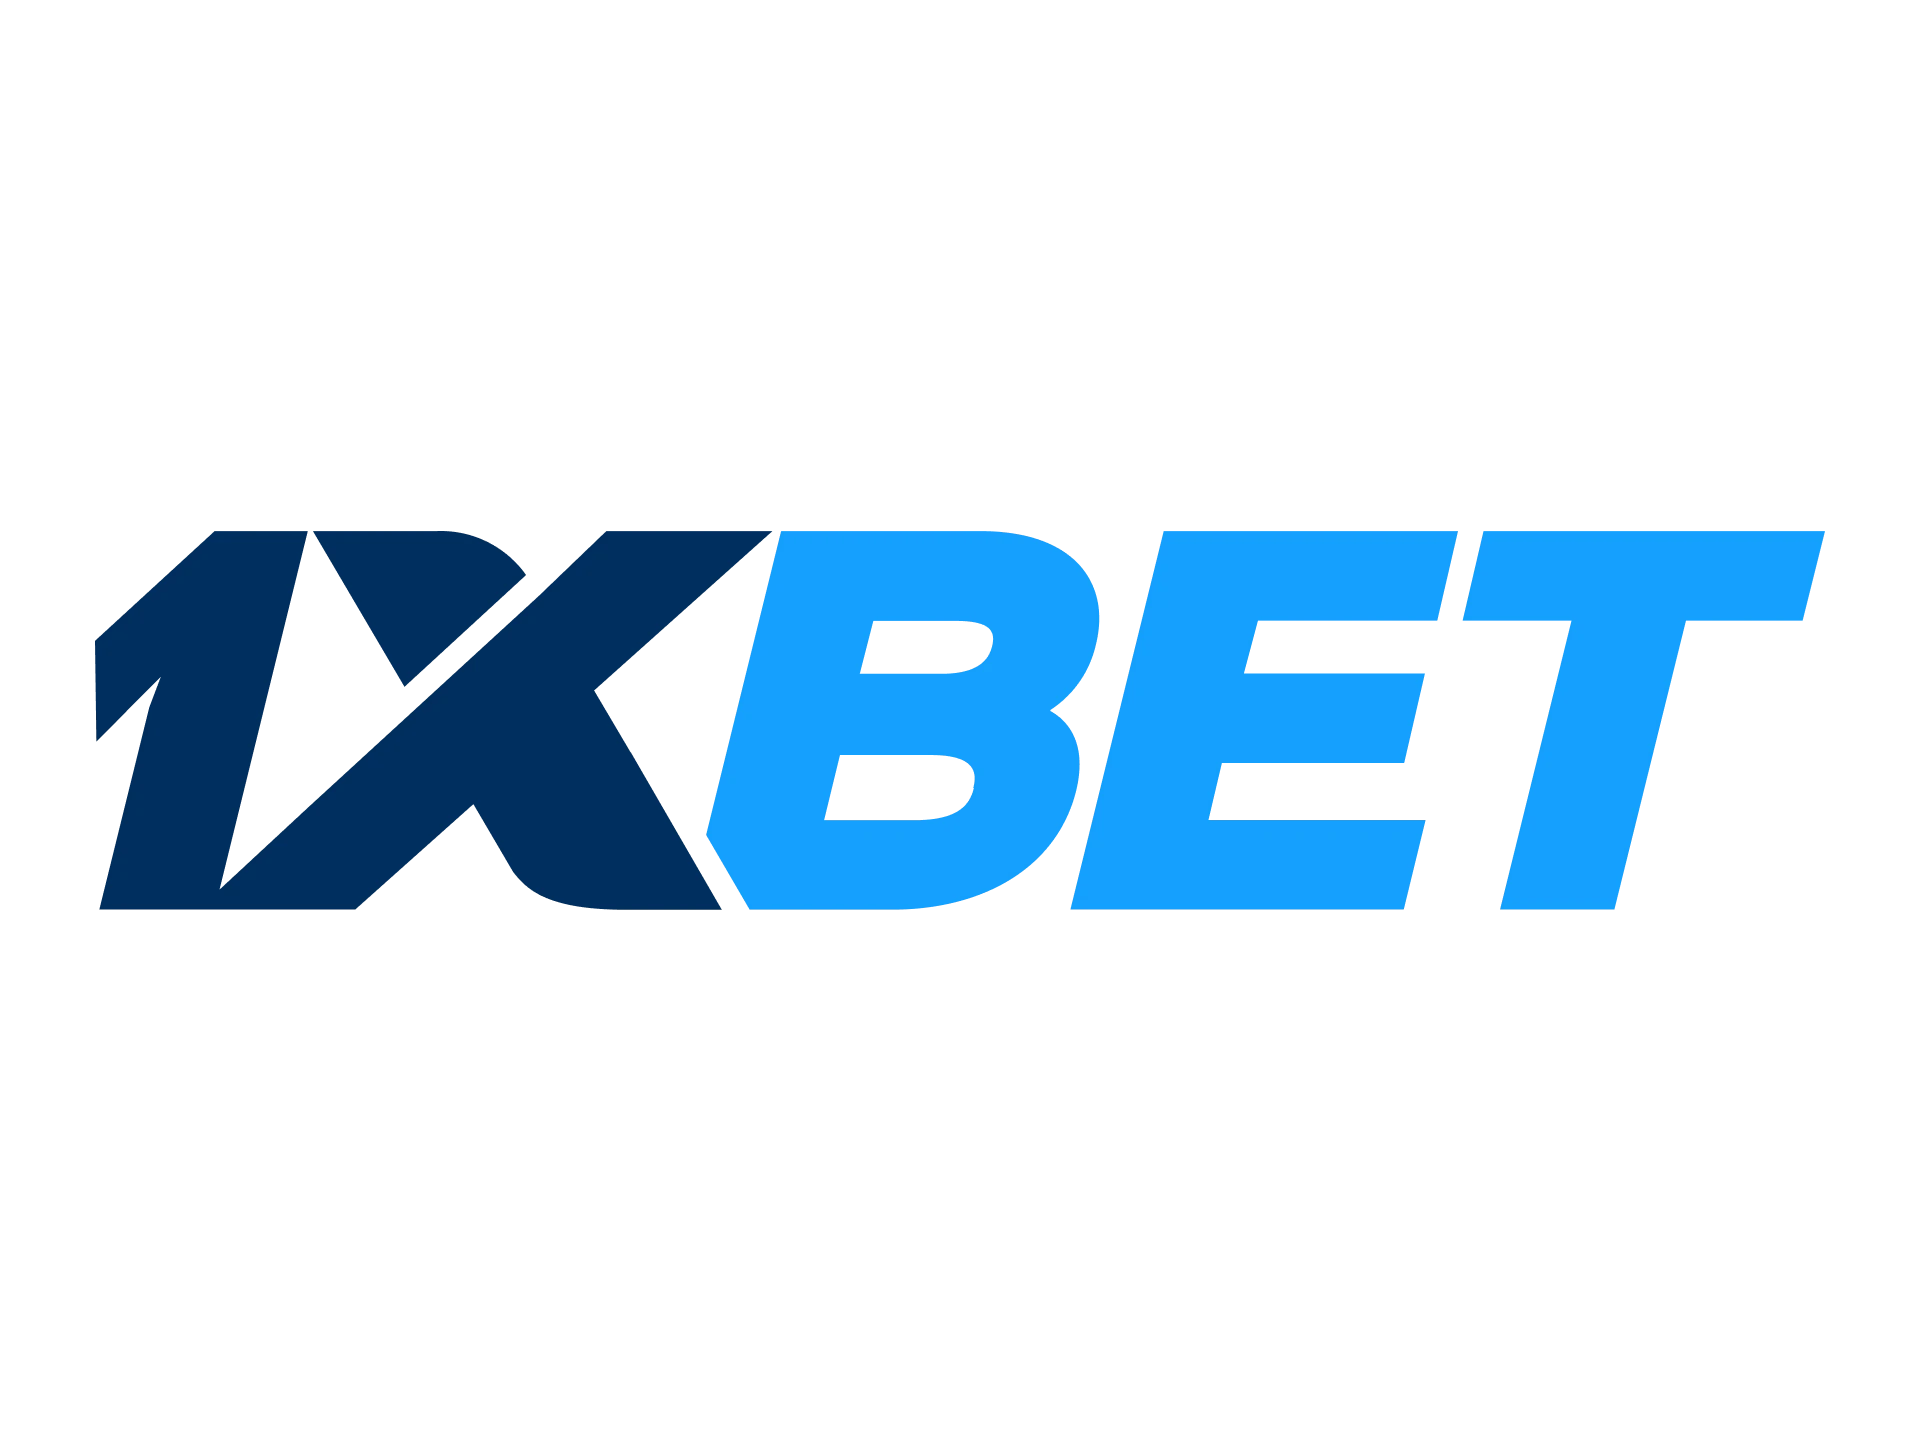 1xBet offers its users a large cricket betting section.